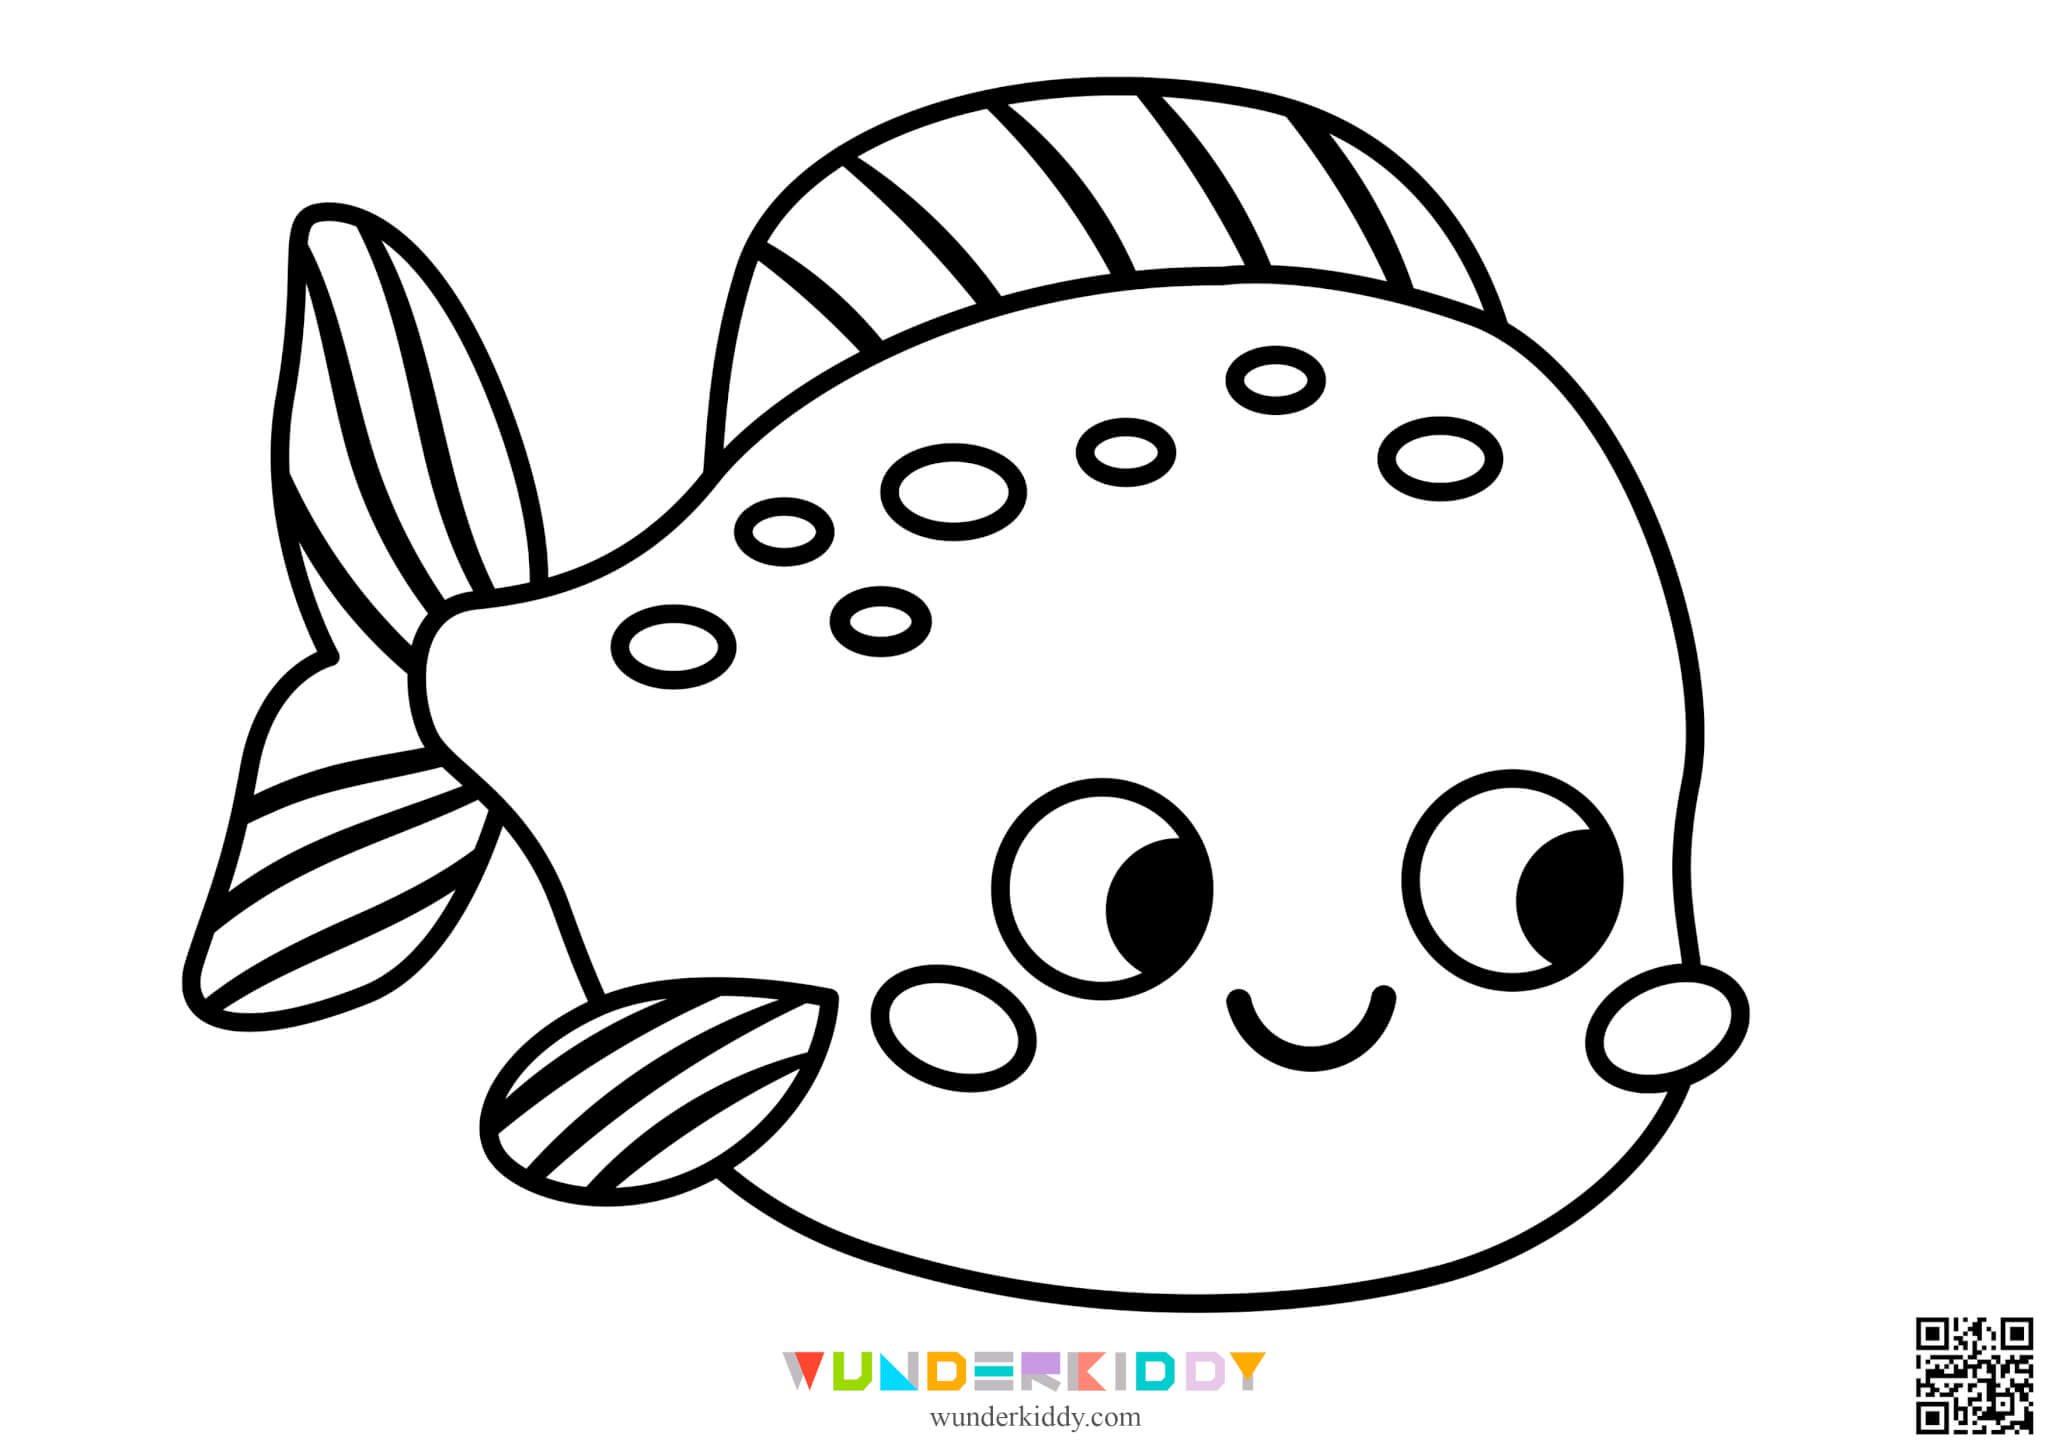 Fish Printable Coloring Pages - Image 2